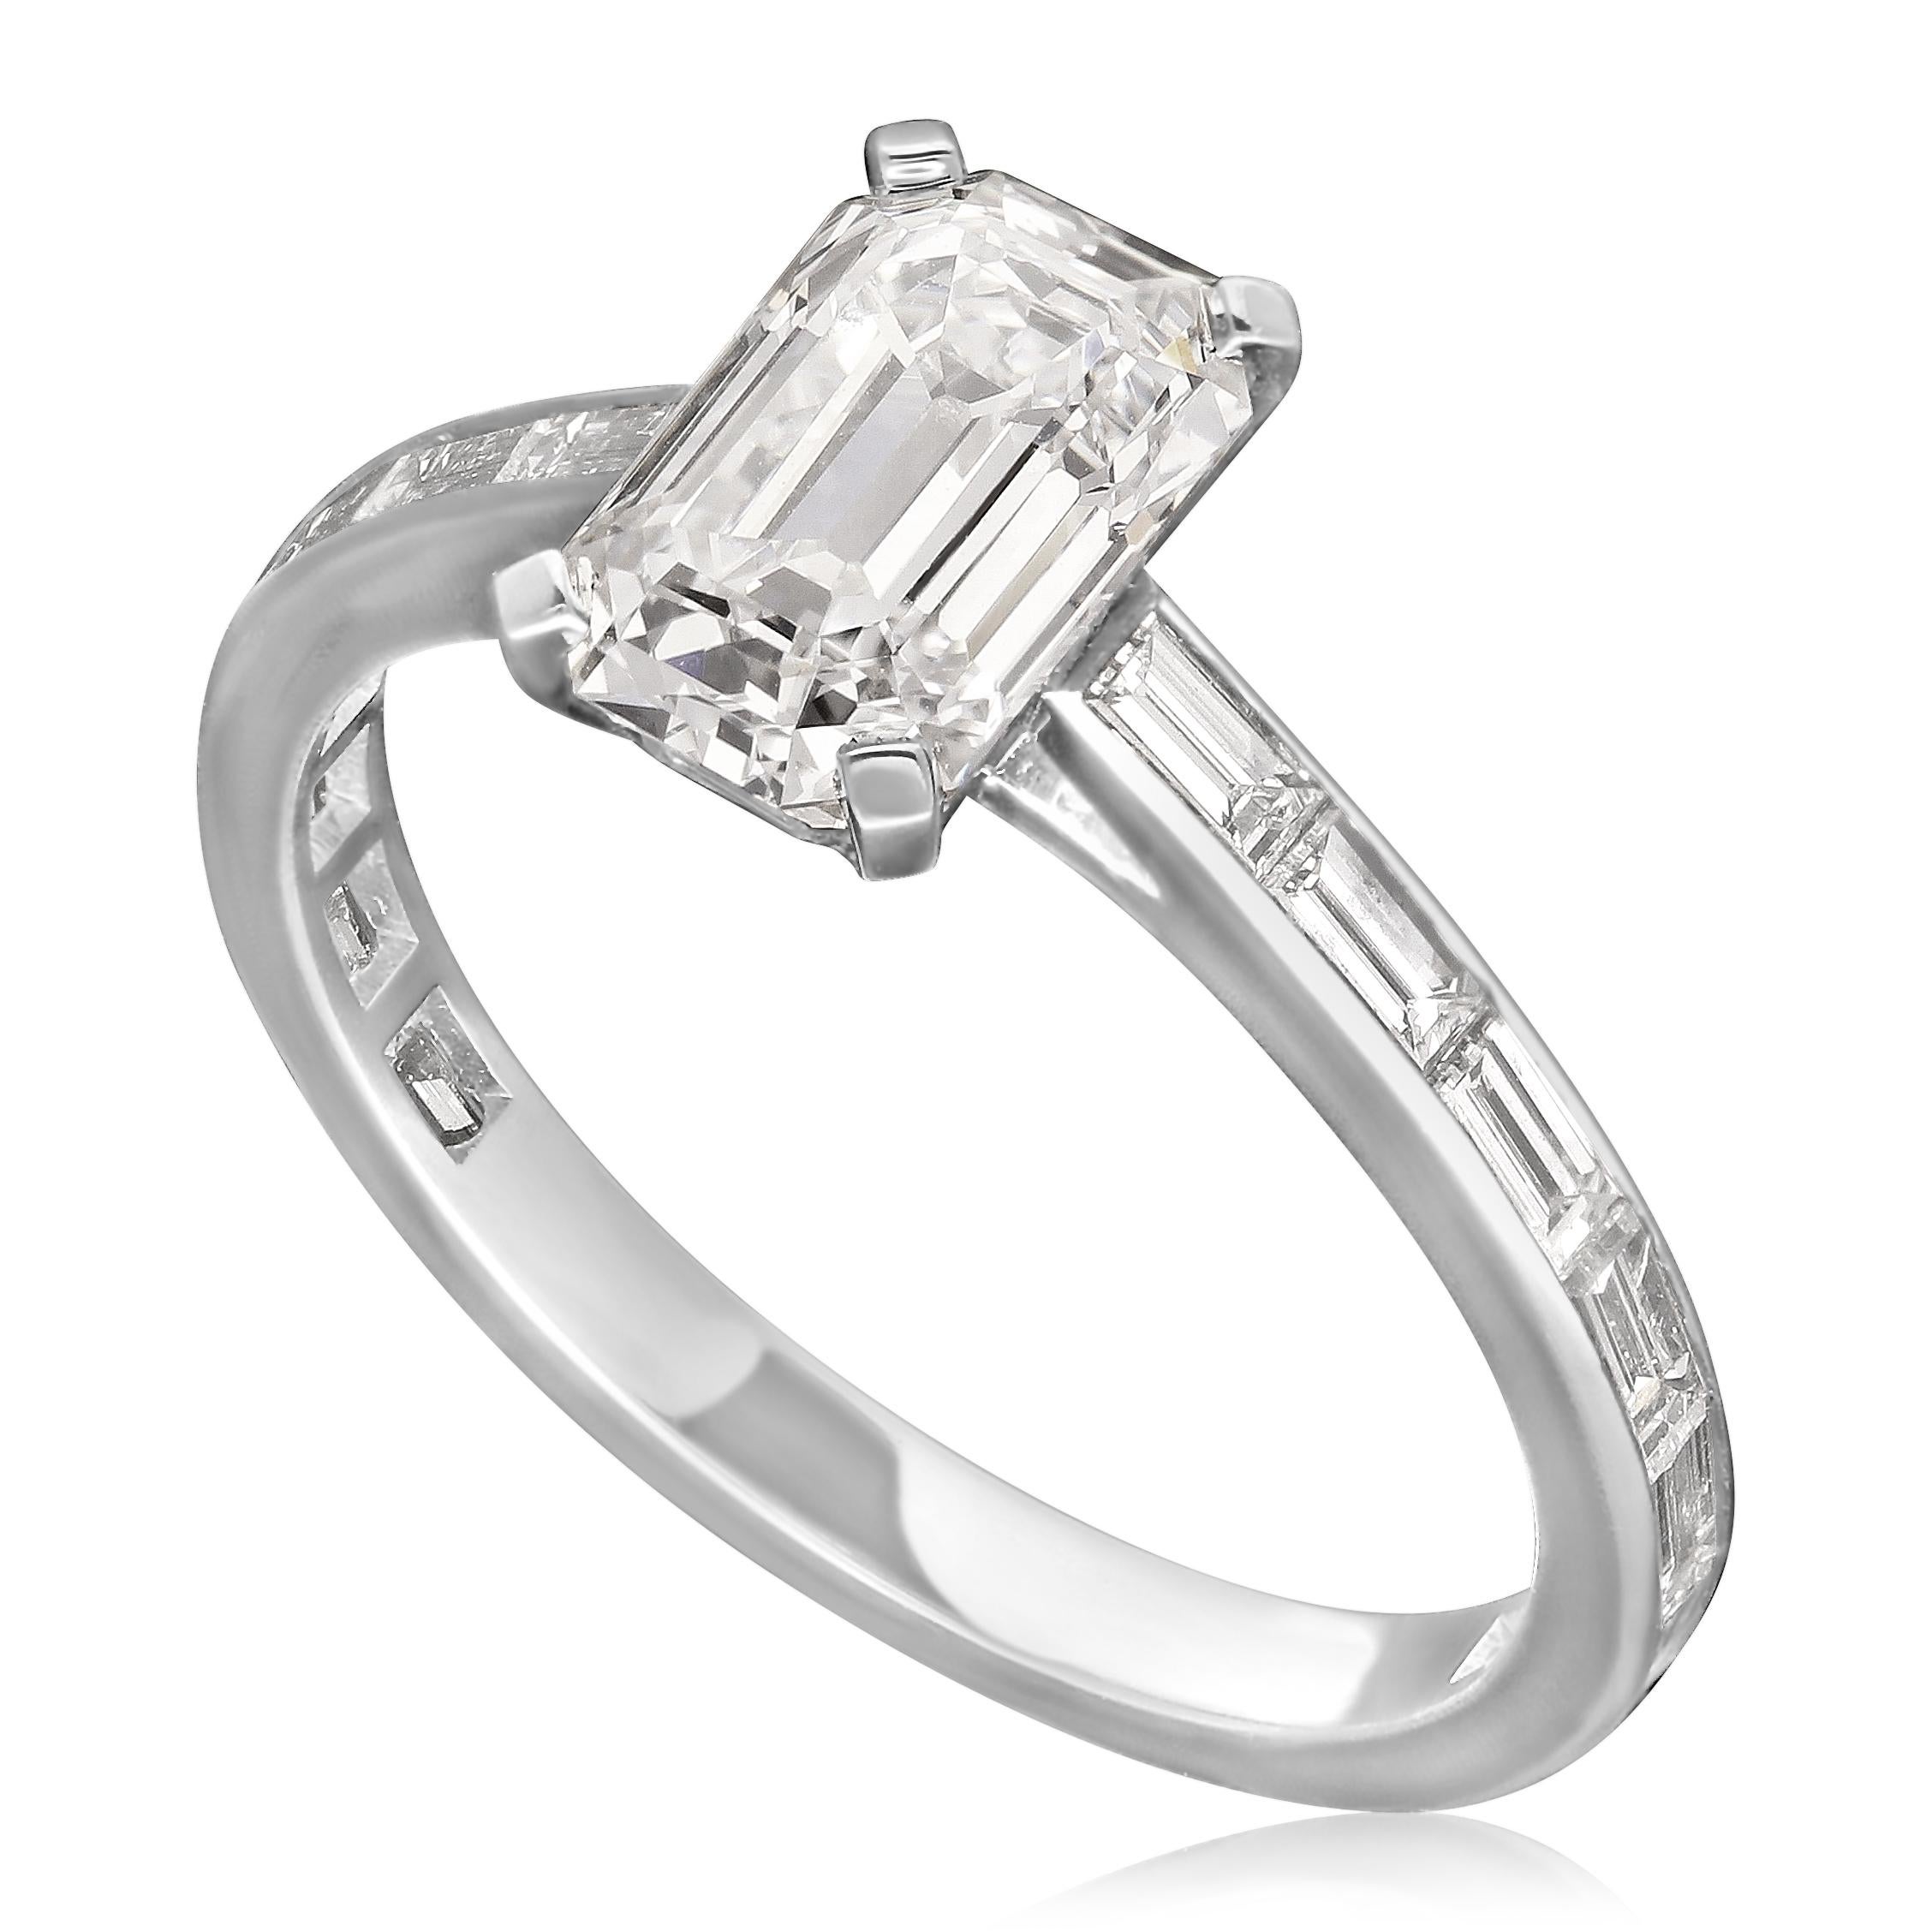 A classic emerald-cut diamond solitaire ring by Hancocks, set with a beautiful vintage emerald-cut diamond weighing 1.52cts and of D colour and IF clarity, corner claw set within a simple platinum mount, the band channel set with baguette